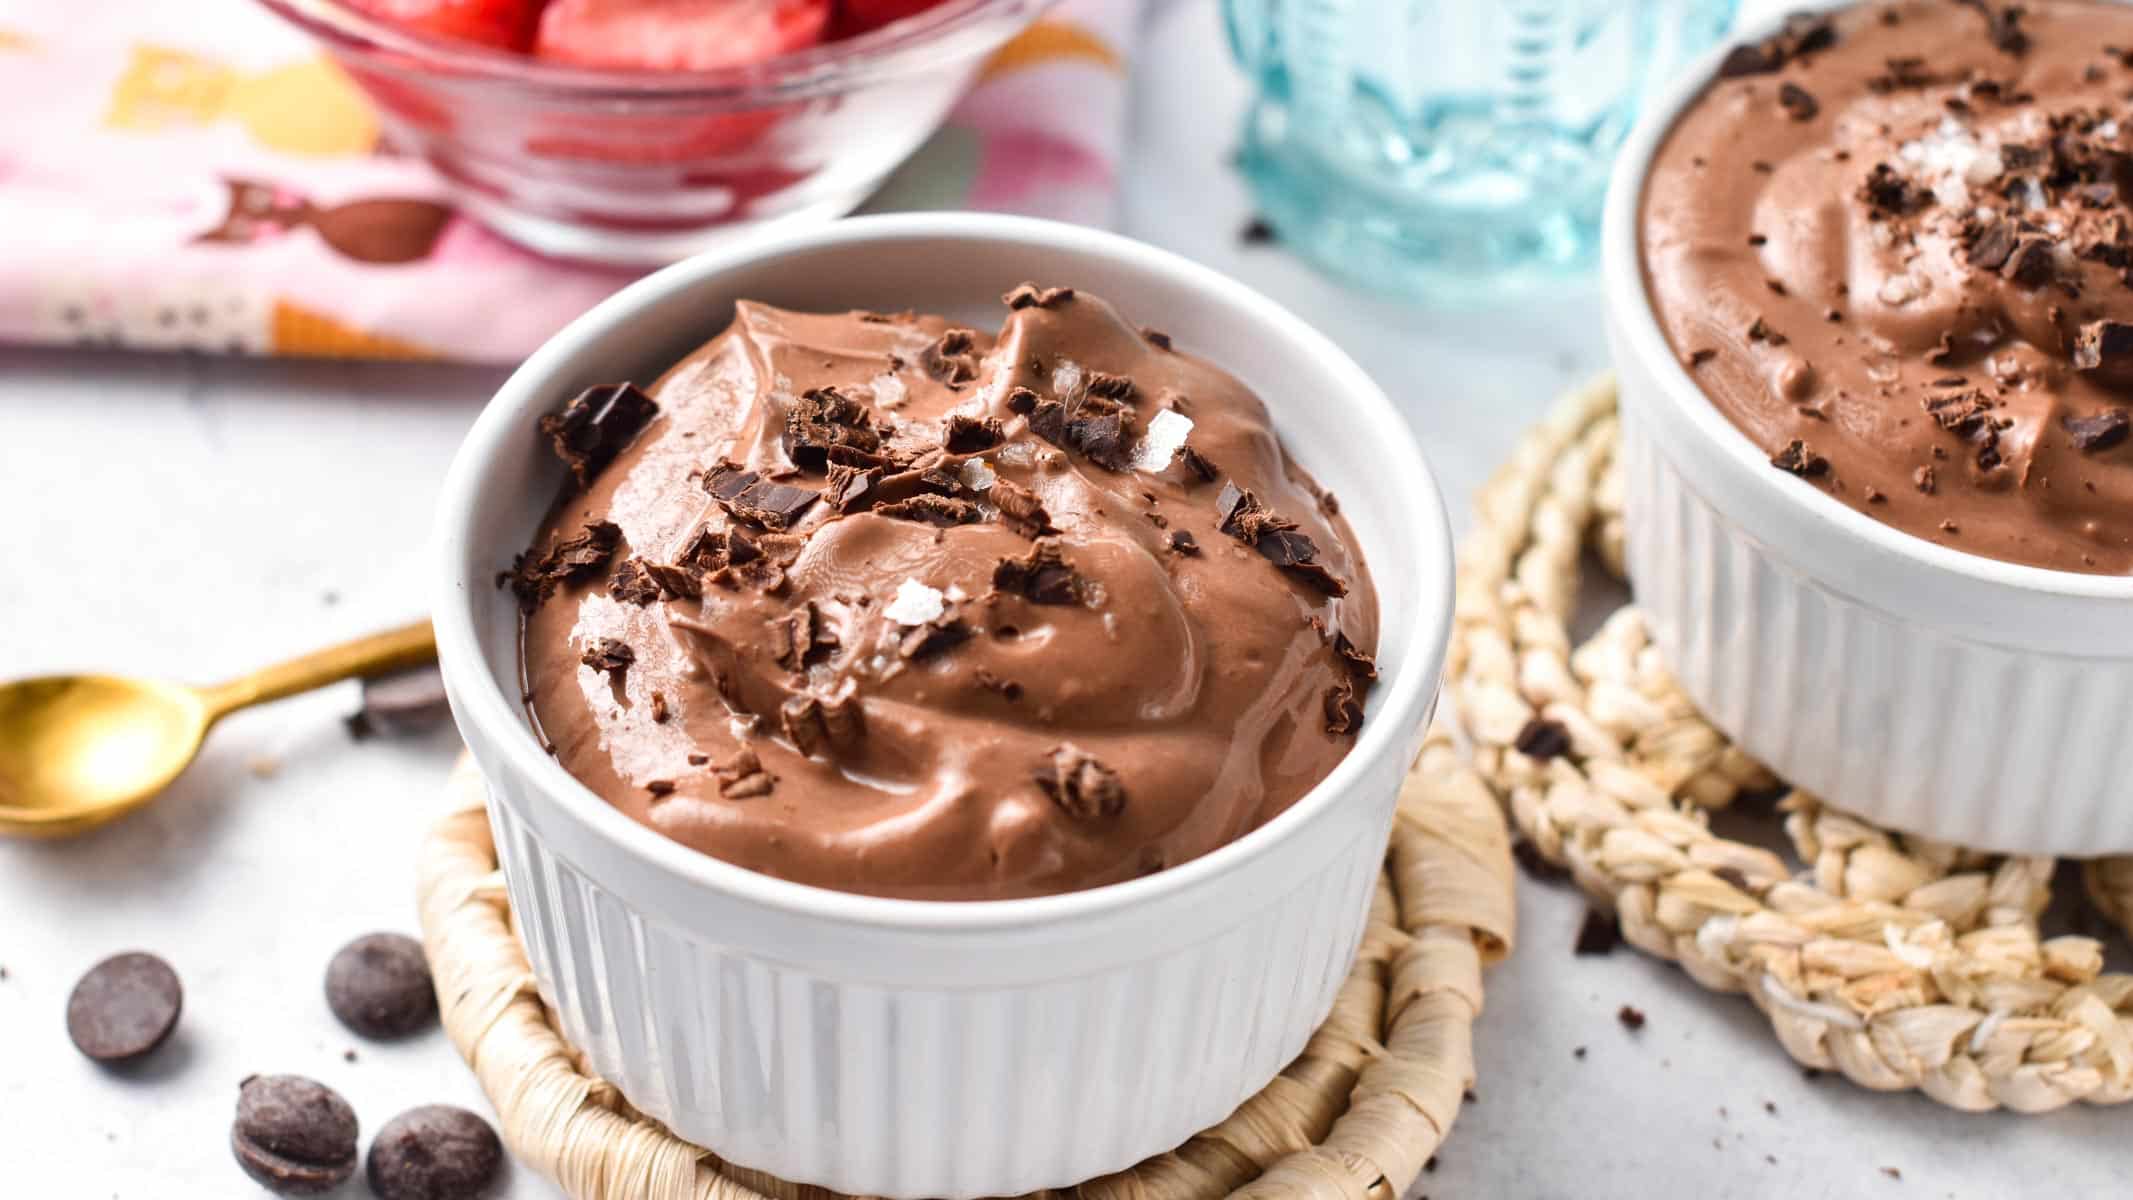 This 3-ingredient Chocolate Yogurt recipe is the easiest way to enjoy a high-protein dessert that truly tastes like chocolate pudding. In fact, all you need is 5 minutes to make this easy healthy dessert, and it's easy to make sugar-free, vegan, and gluten-free.